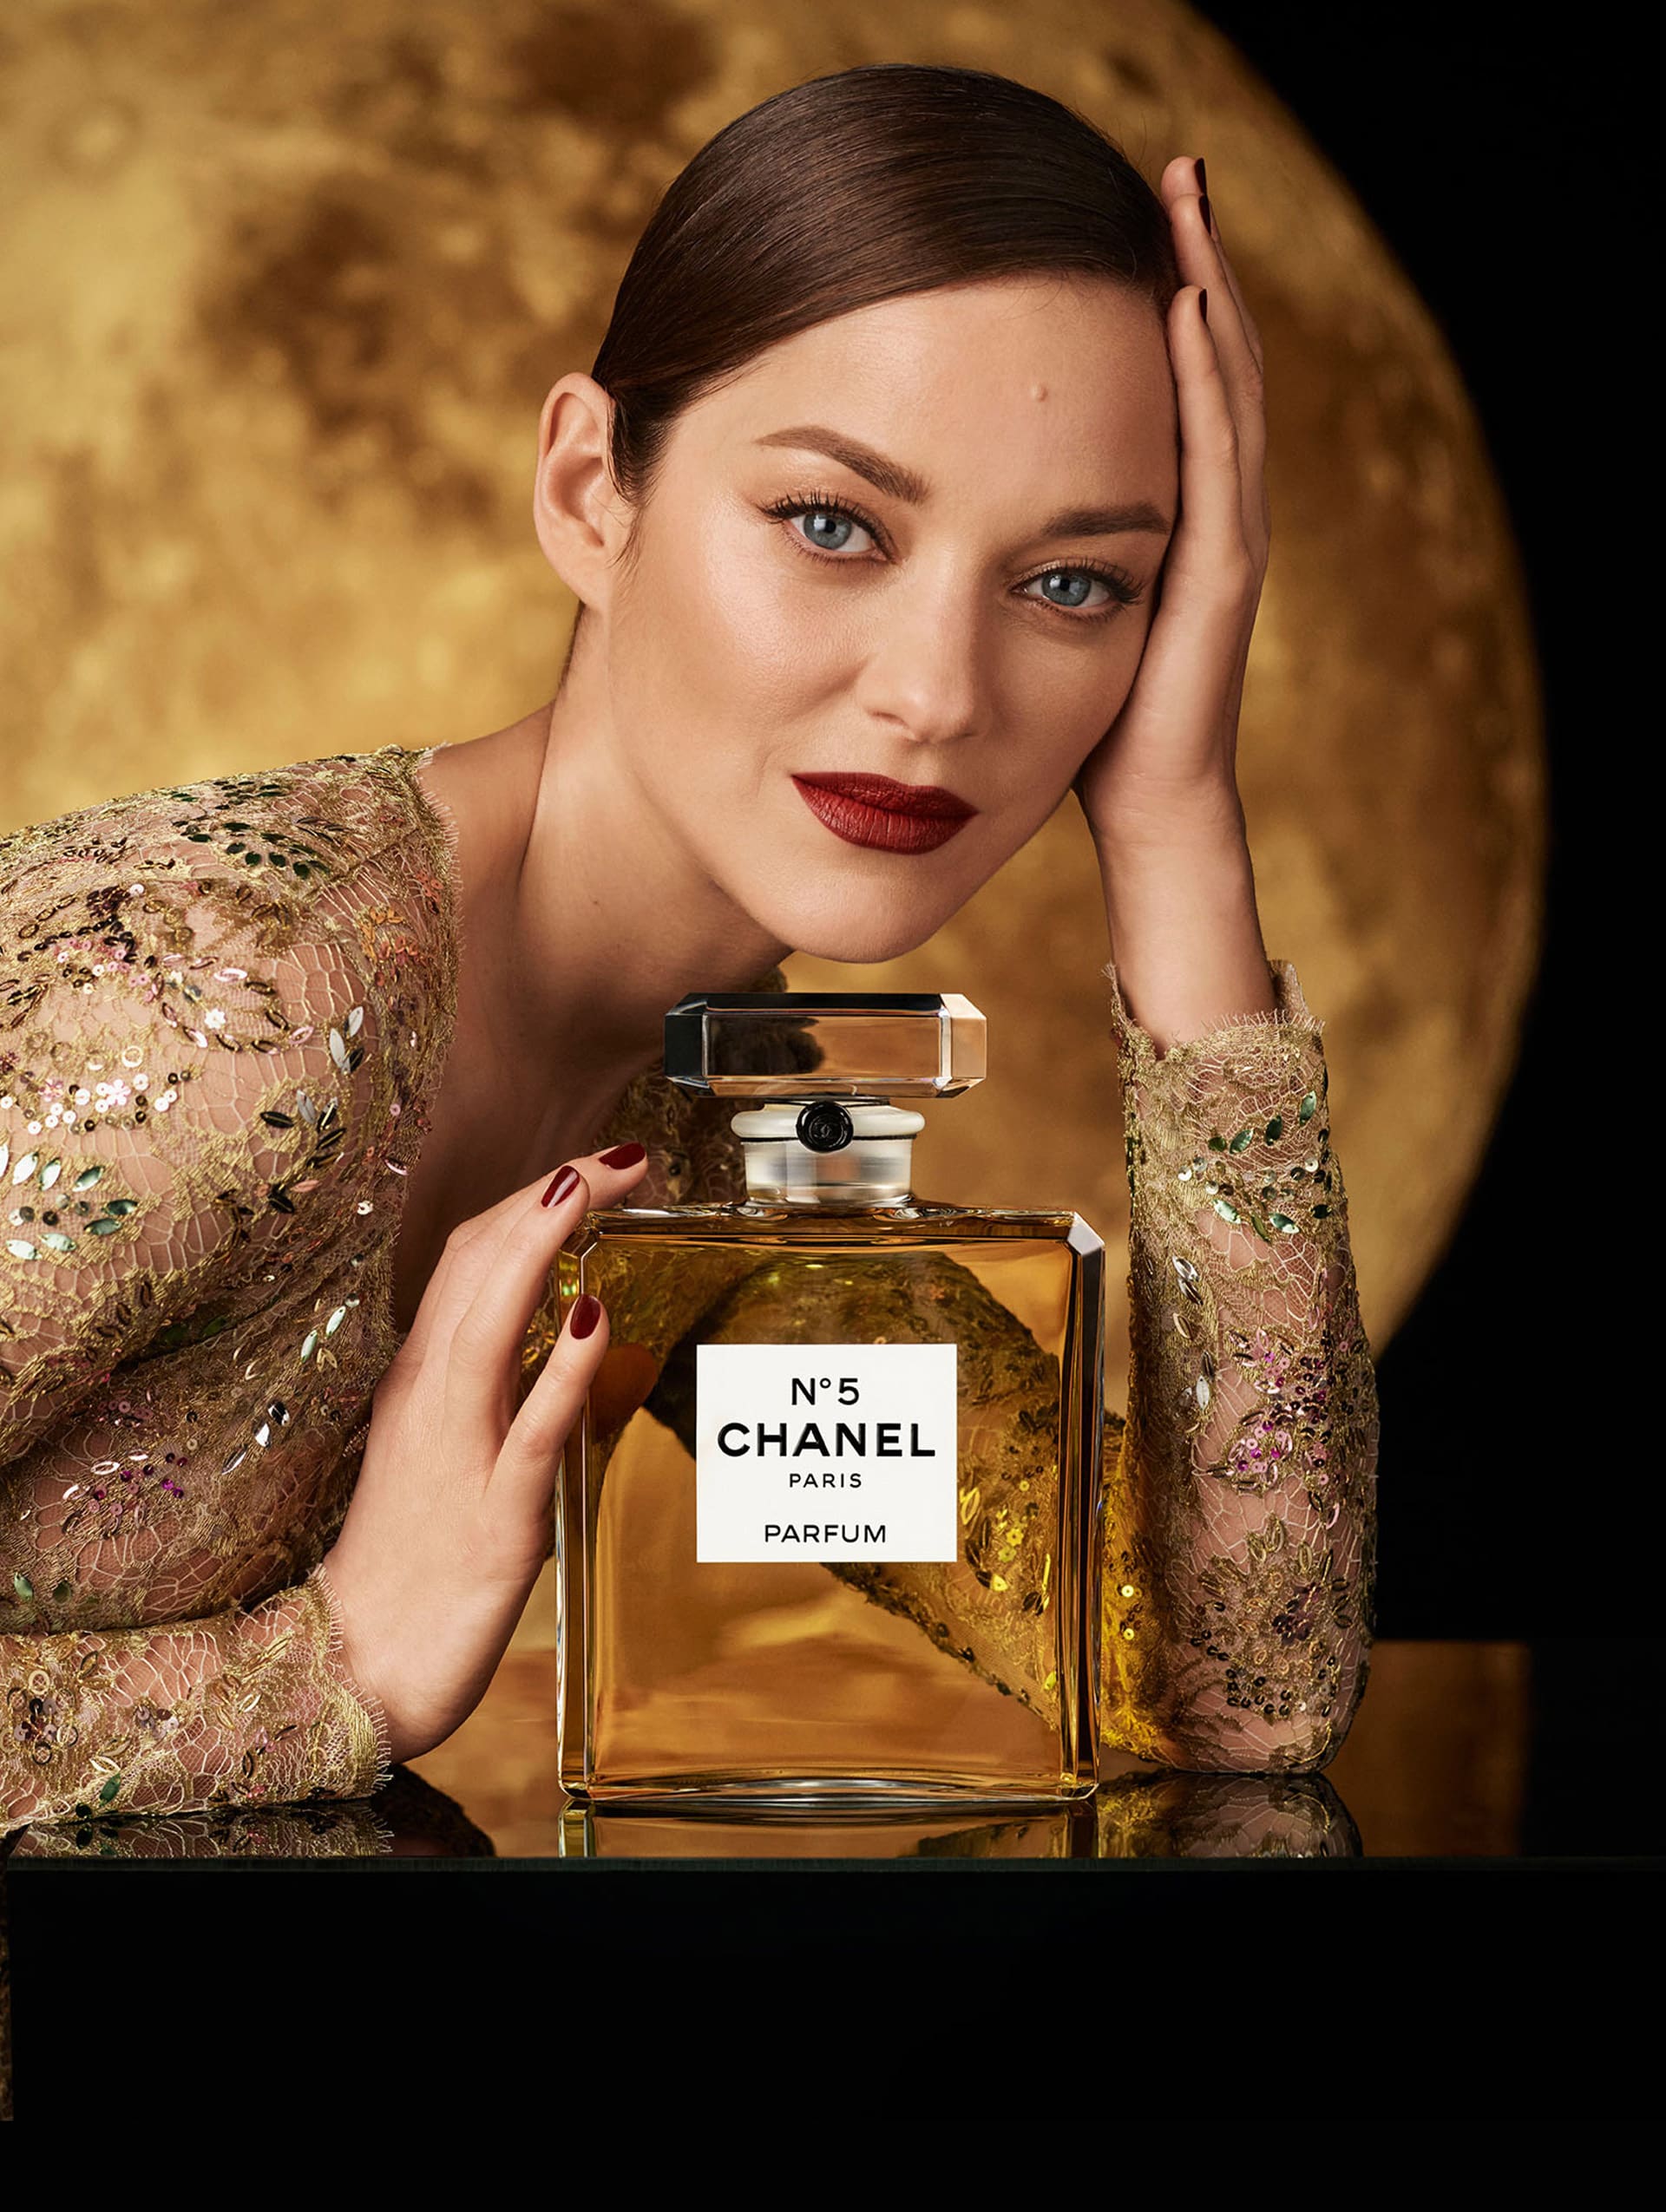 Chanel N°5 Holiday 2020 Ad Campaign with Marion Cotillard | The Impression